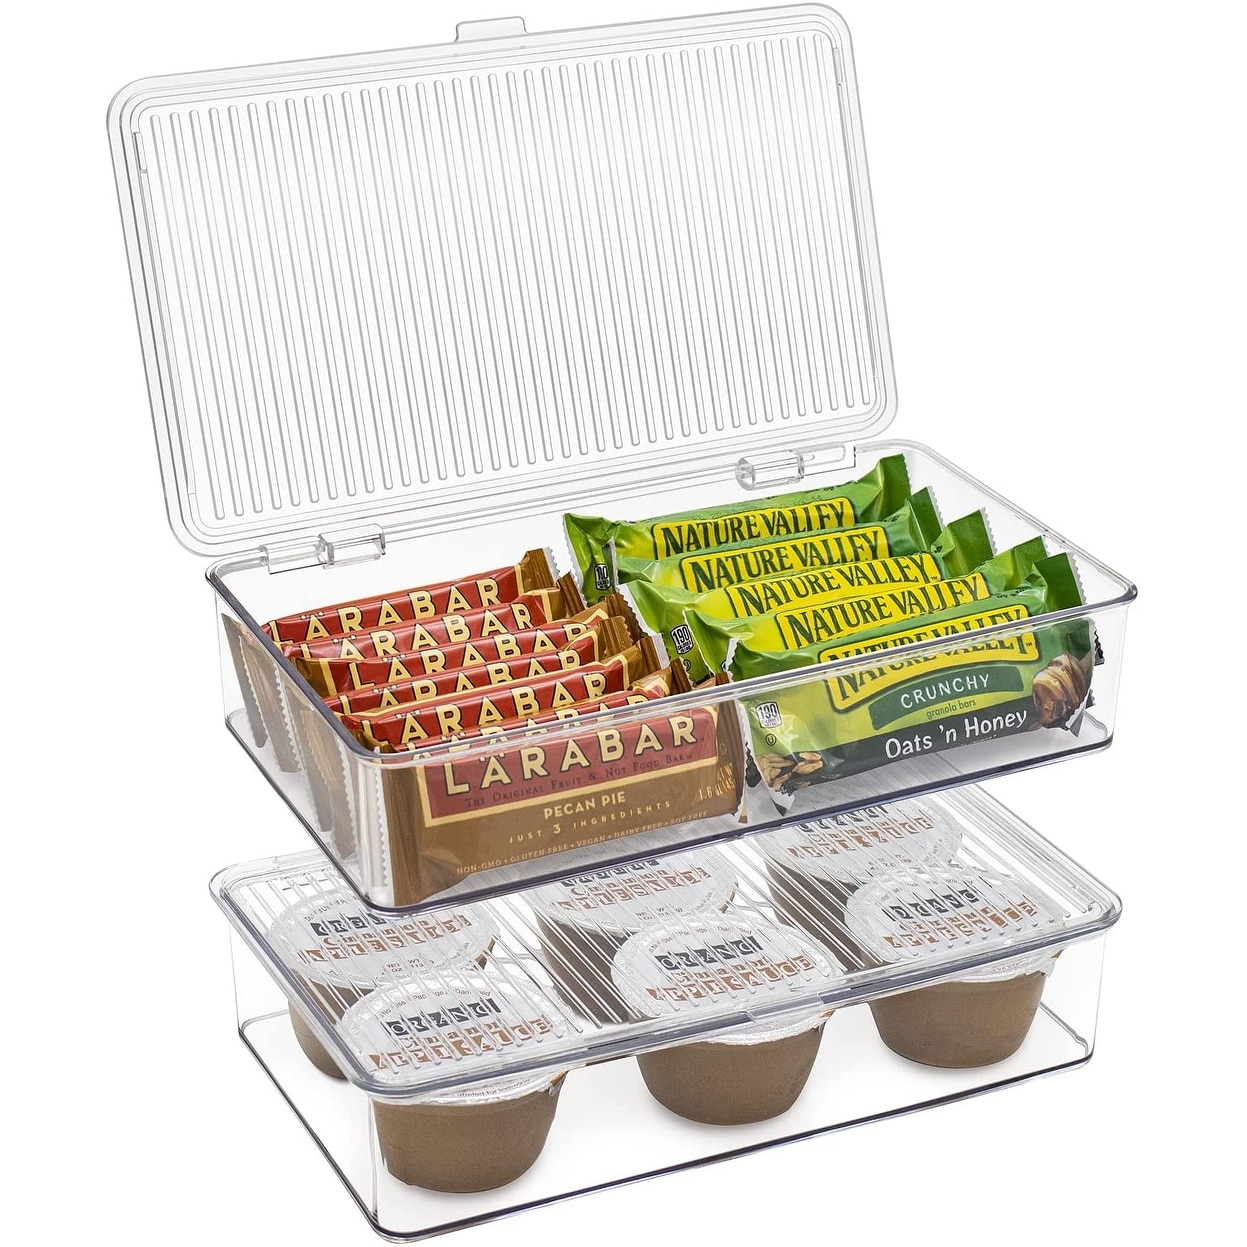 https://ak1.ostkcdn.com/images/products/is/images/direct/d699b3a3185e3b935f49737514b7325fb05cf4fc/Organizer-Bins%2C-With-Lids%2C-Kitchen-Pantry-Organization%2C-Food-Storage-Containers-%2810.87%22-L-x-6.50%22-W-x-2.37%22-H%29.jpg